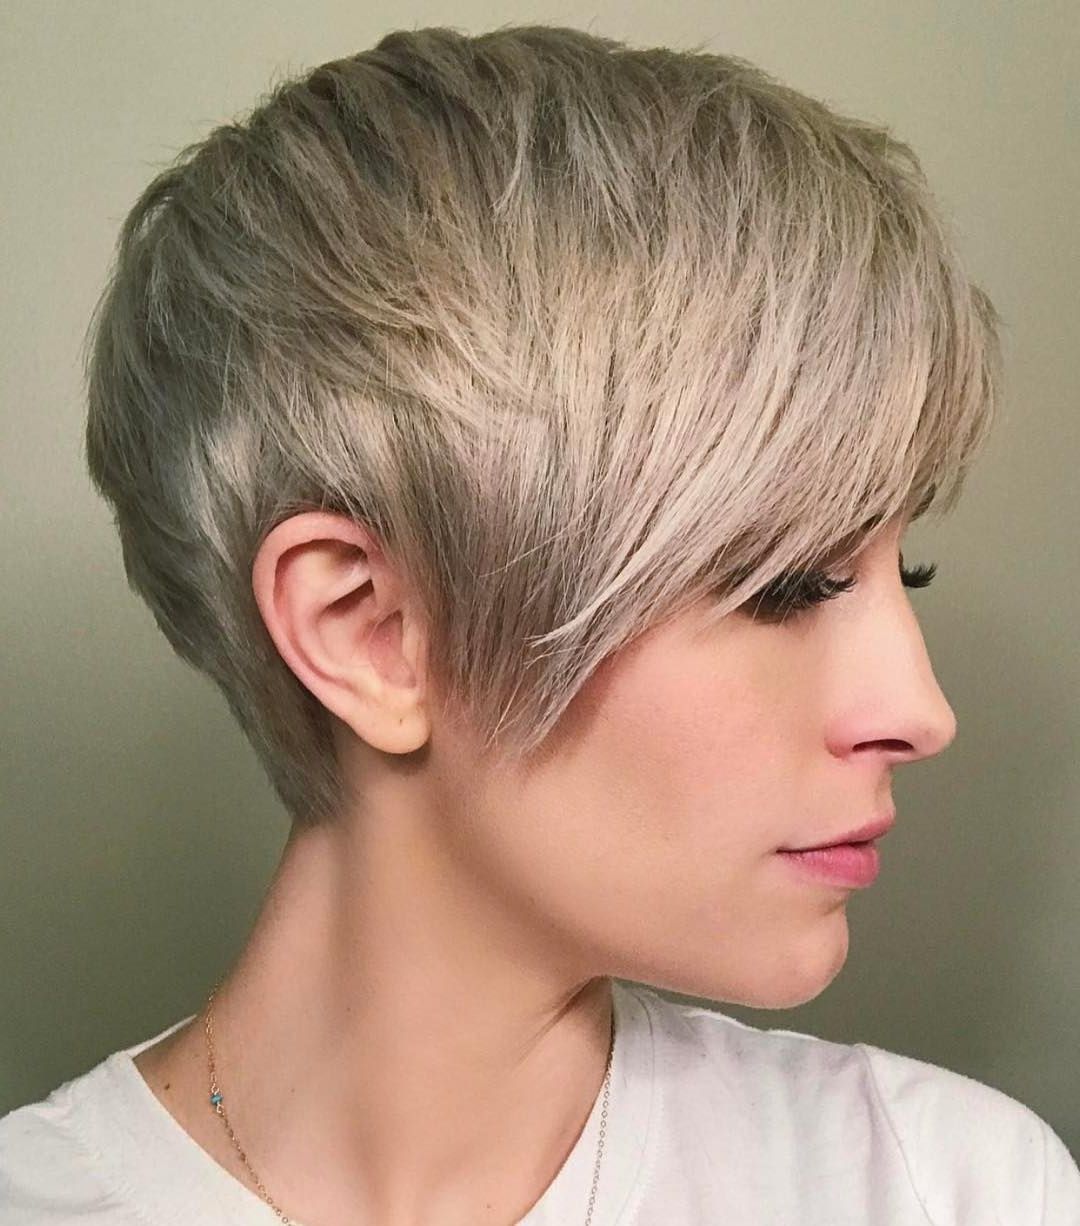 10 Best Short Straight Hairstyle Trends – Women Short Haircut Ideas 2018 Within 2018 Disconnected Blonde Balayage Pixie Haircuts (View 2 of 15)